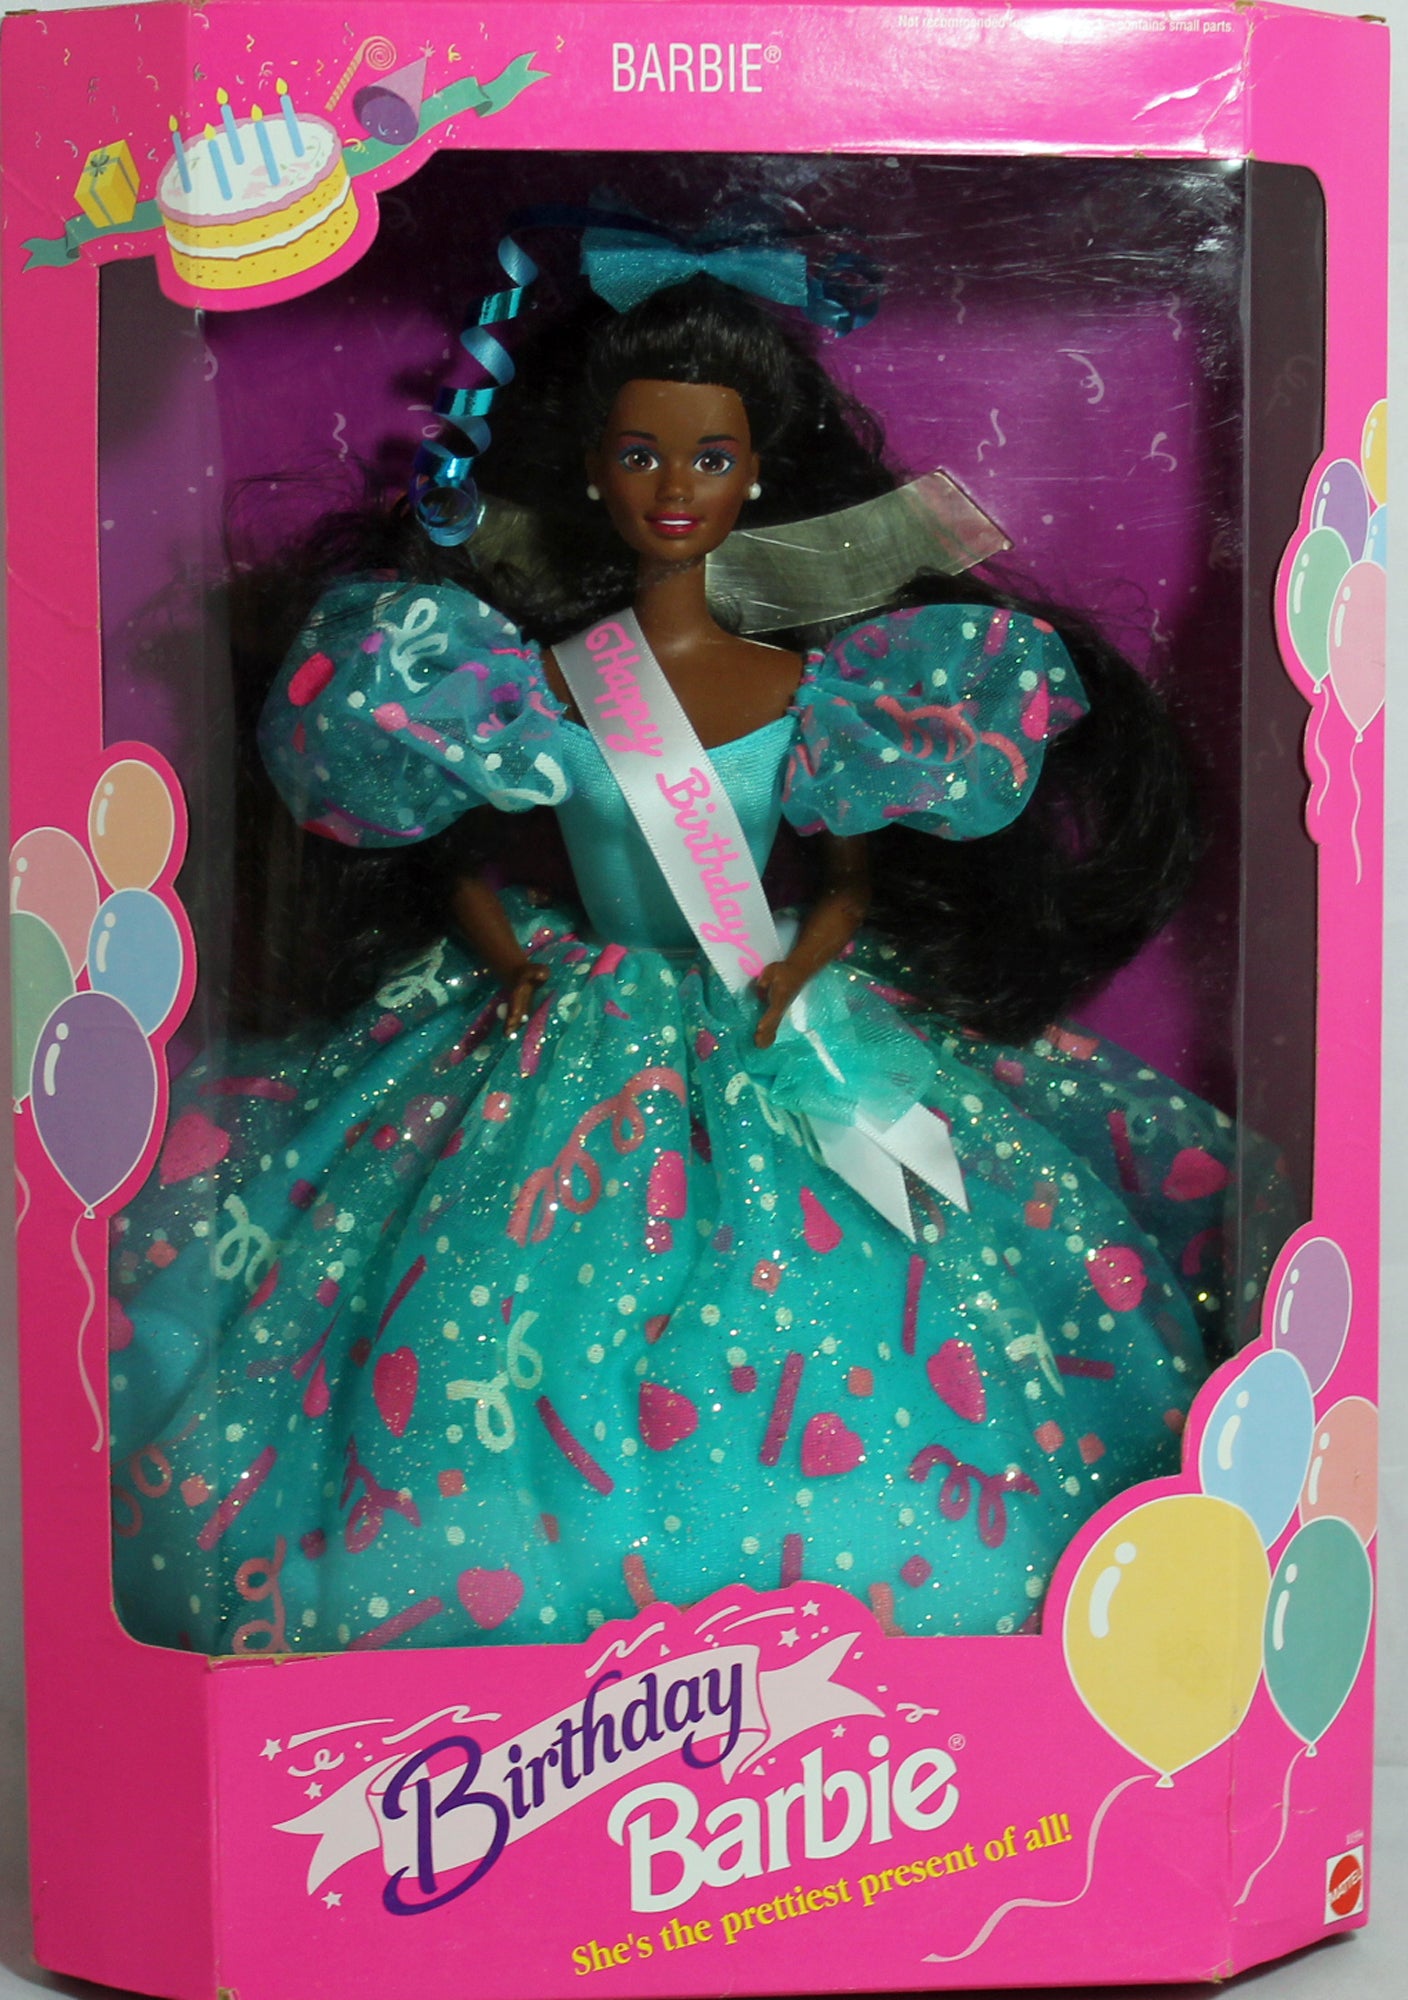 Birthday BARBIE Doll The Prettiest Present For Your...Special Day